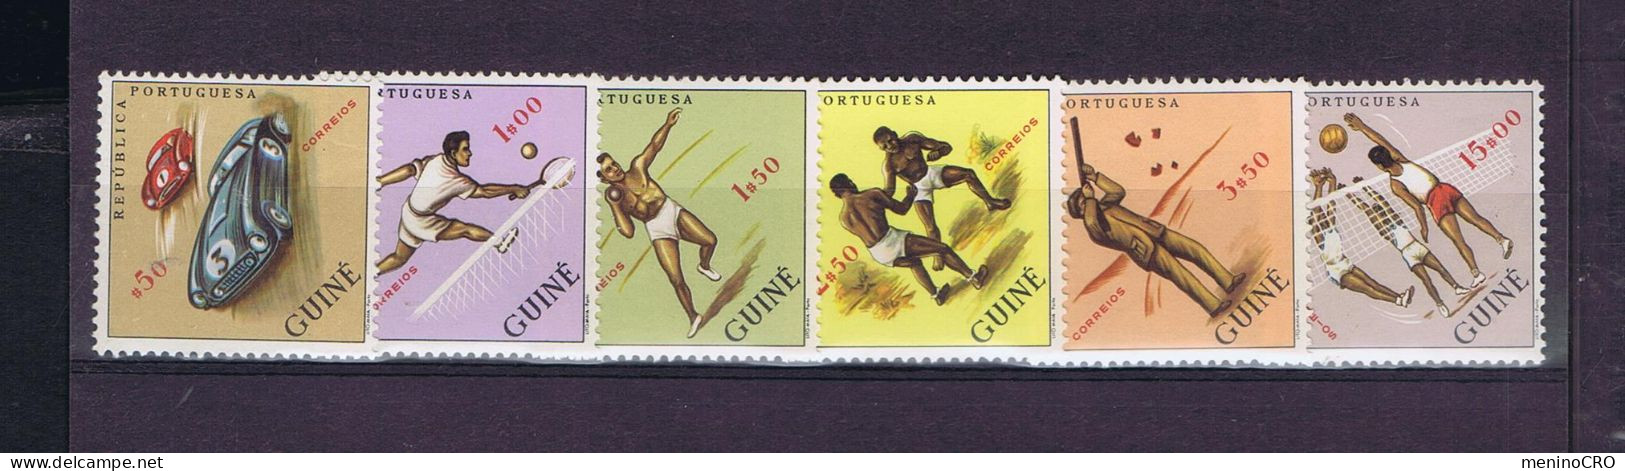 Gc8059 GUINÉ Port. Sports Divers 1962 Set 6v. Mint Issue Portugal - Volley-Ball